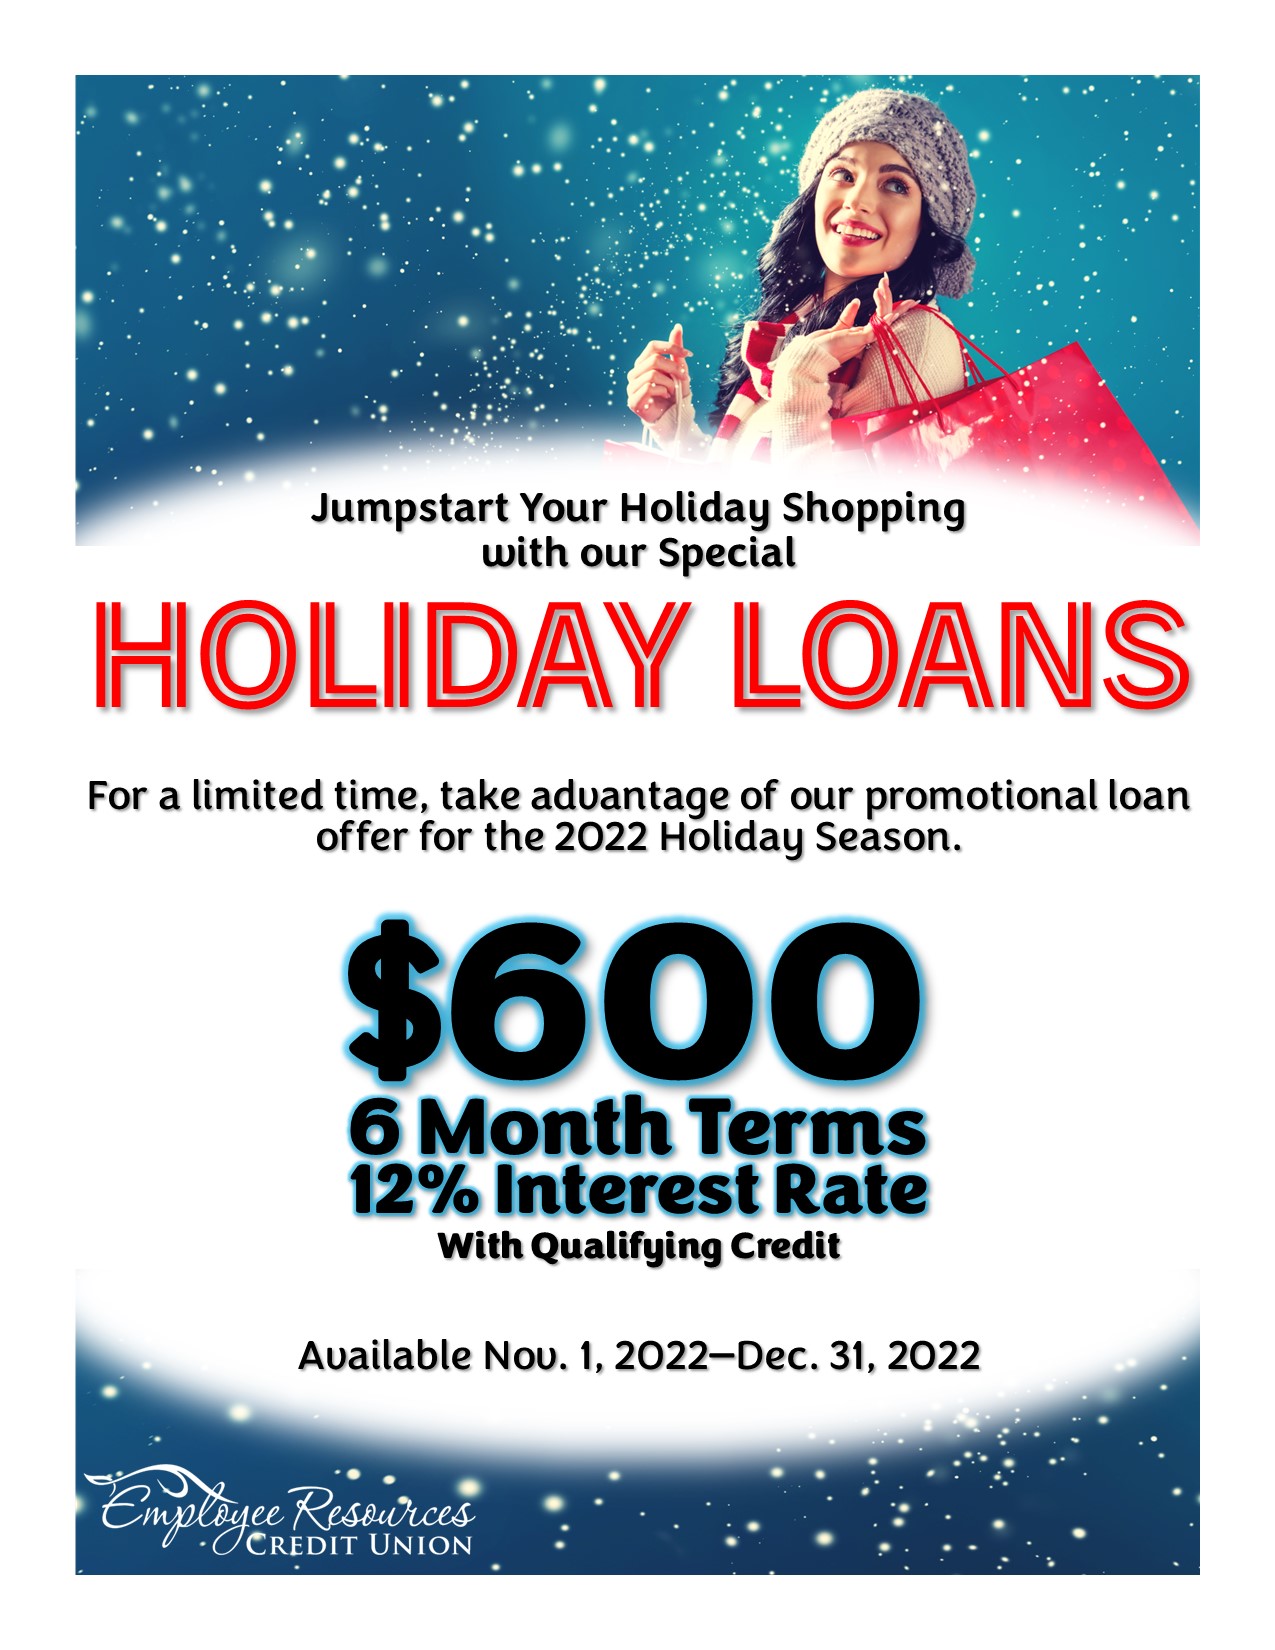 Holiday Loan Promotion Employee Resources Credit Union